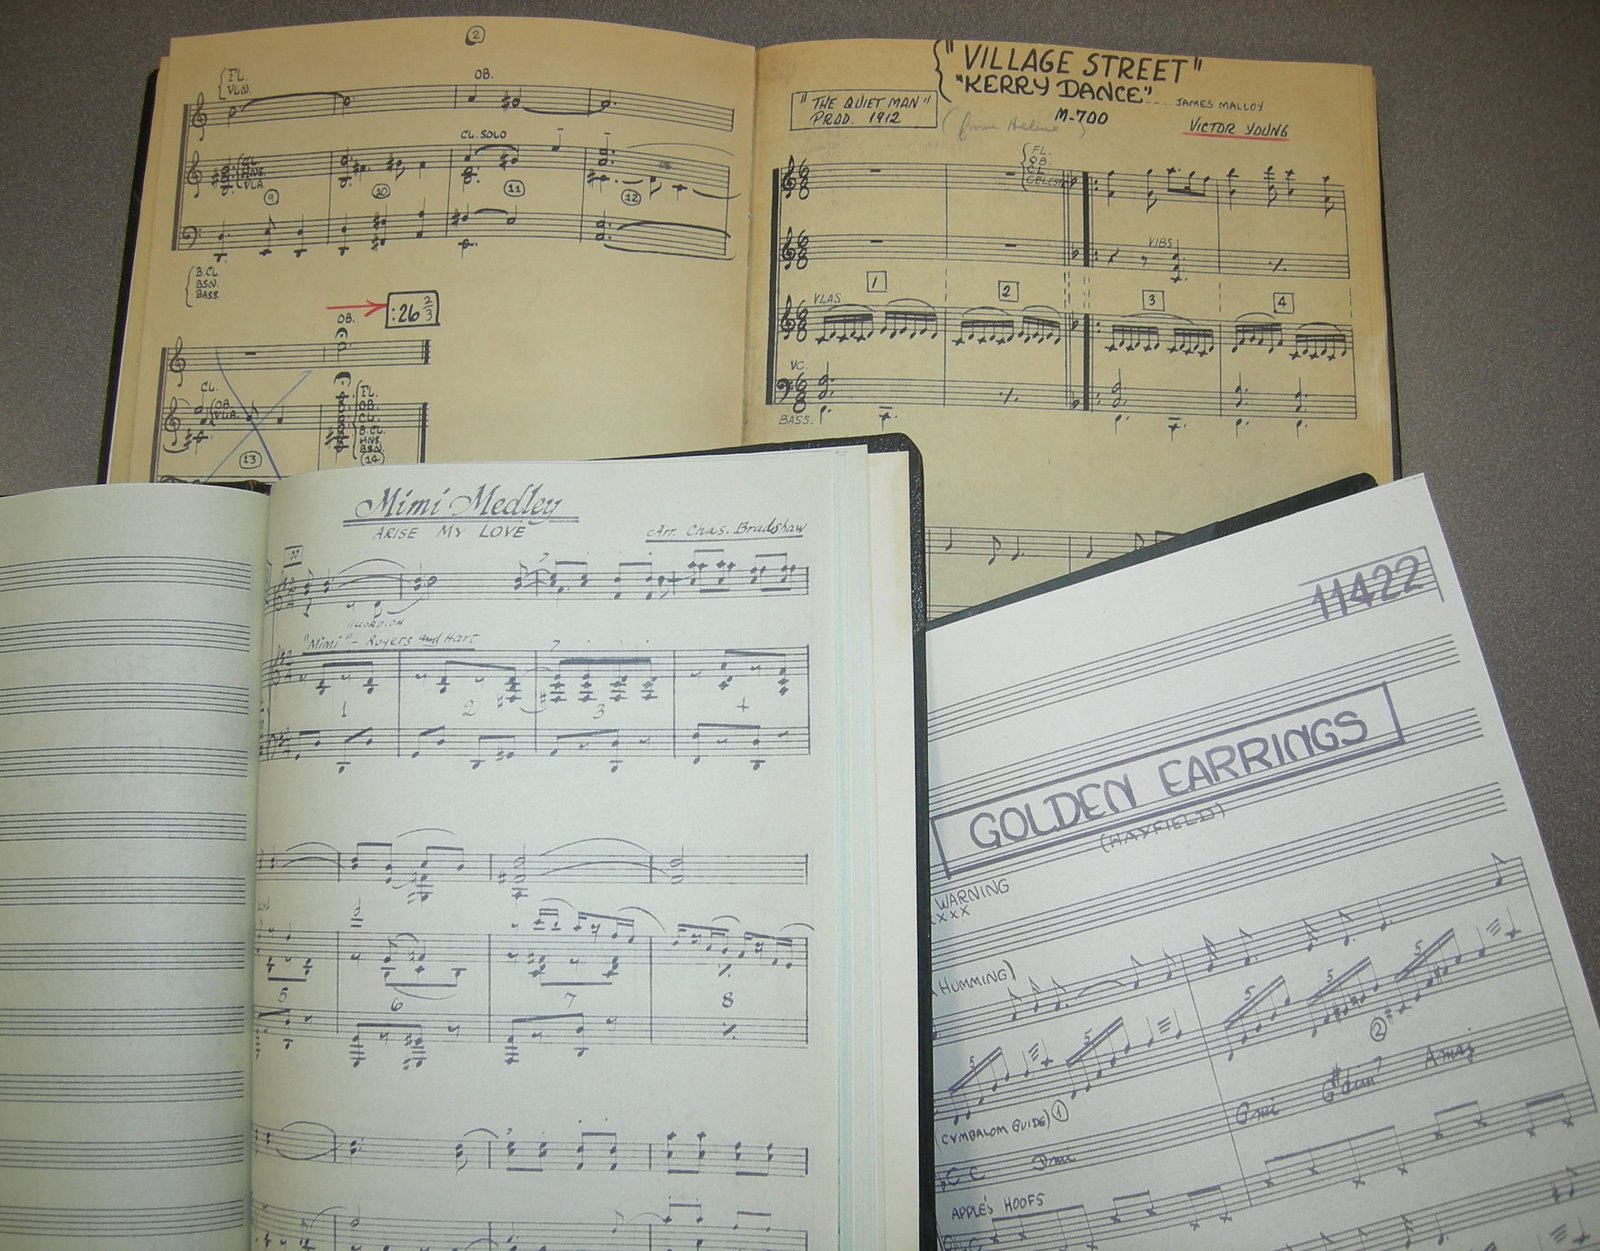 Music sheets by Victor Young for "Village Street," "Mimi Medley," and "Golden Earrings" 